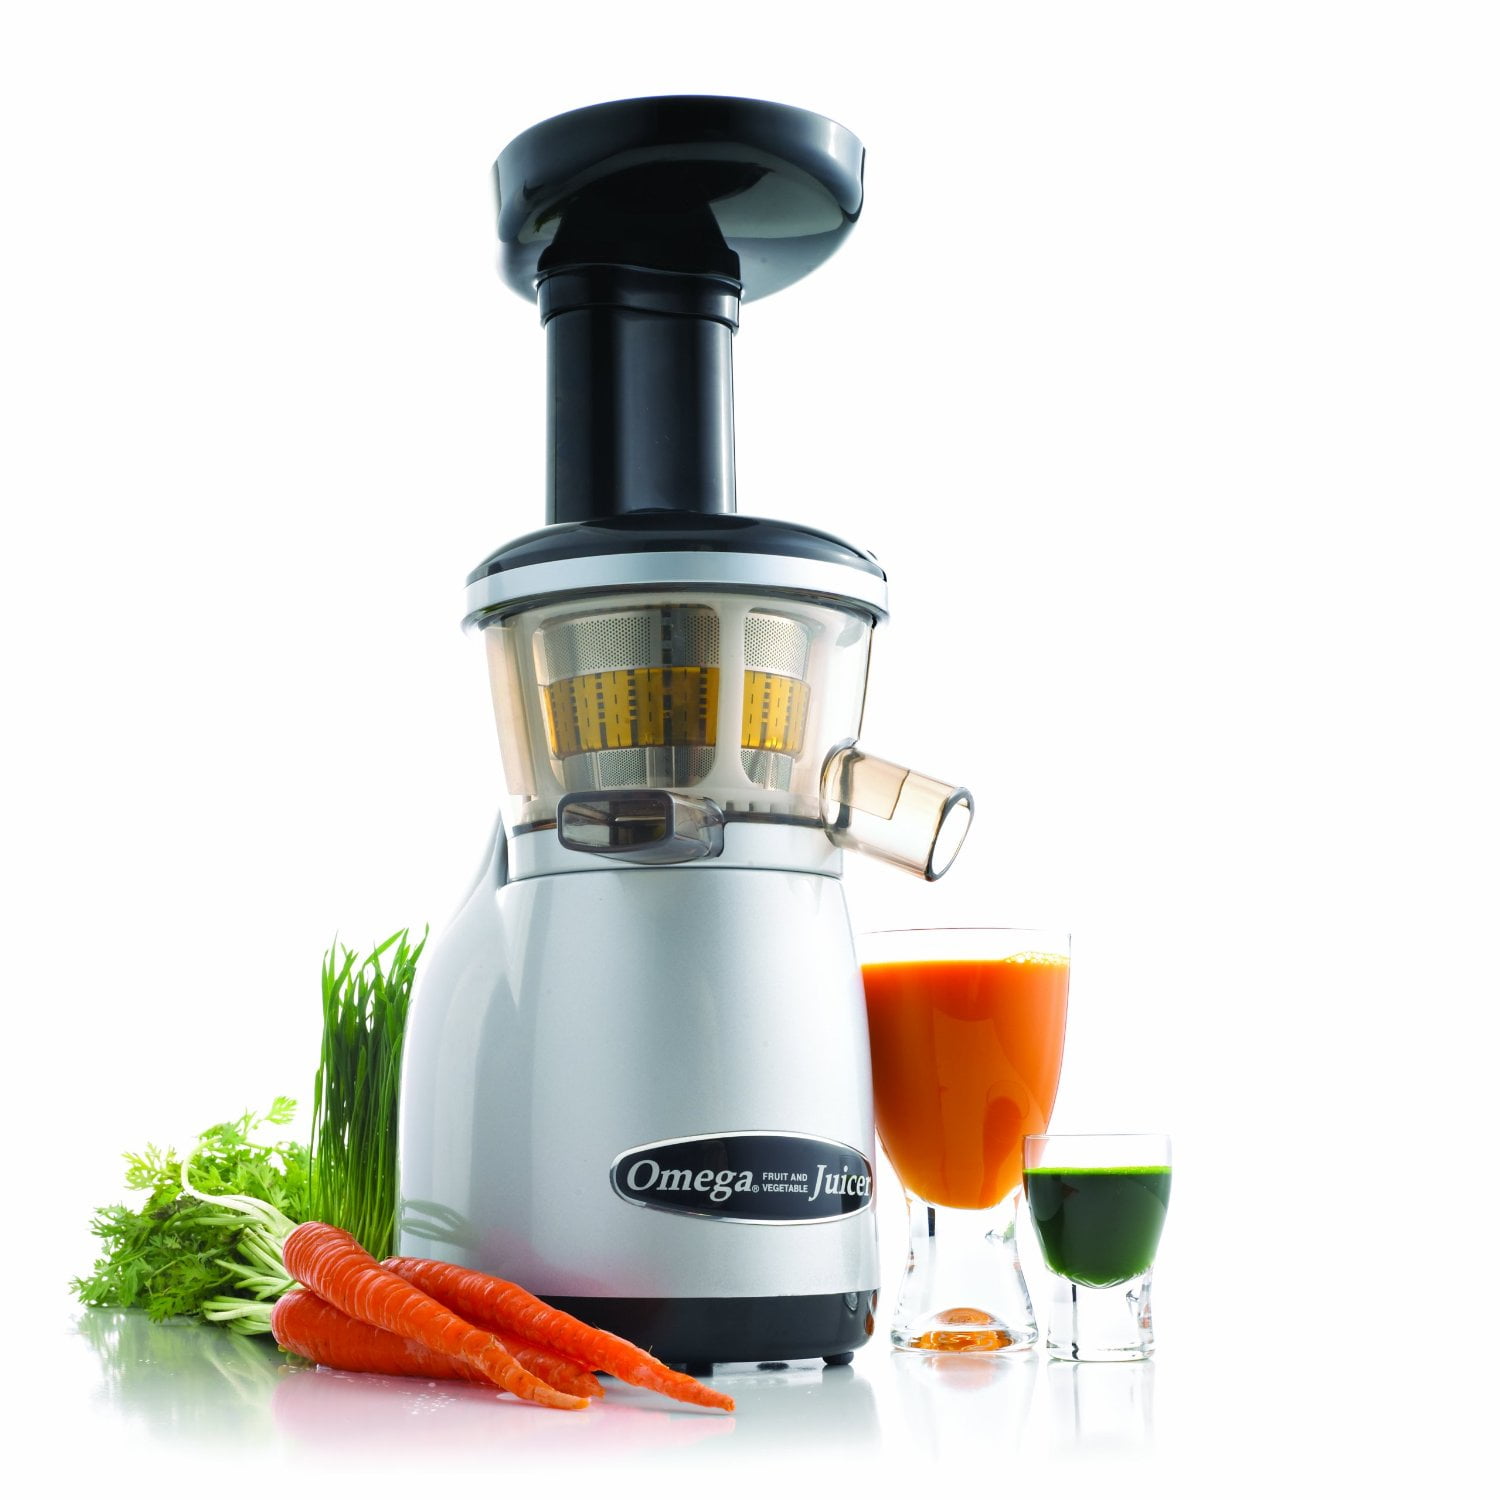 Nutrimill Smart Slow Juicer Portable and Cordless Masticating Single Auger